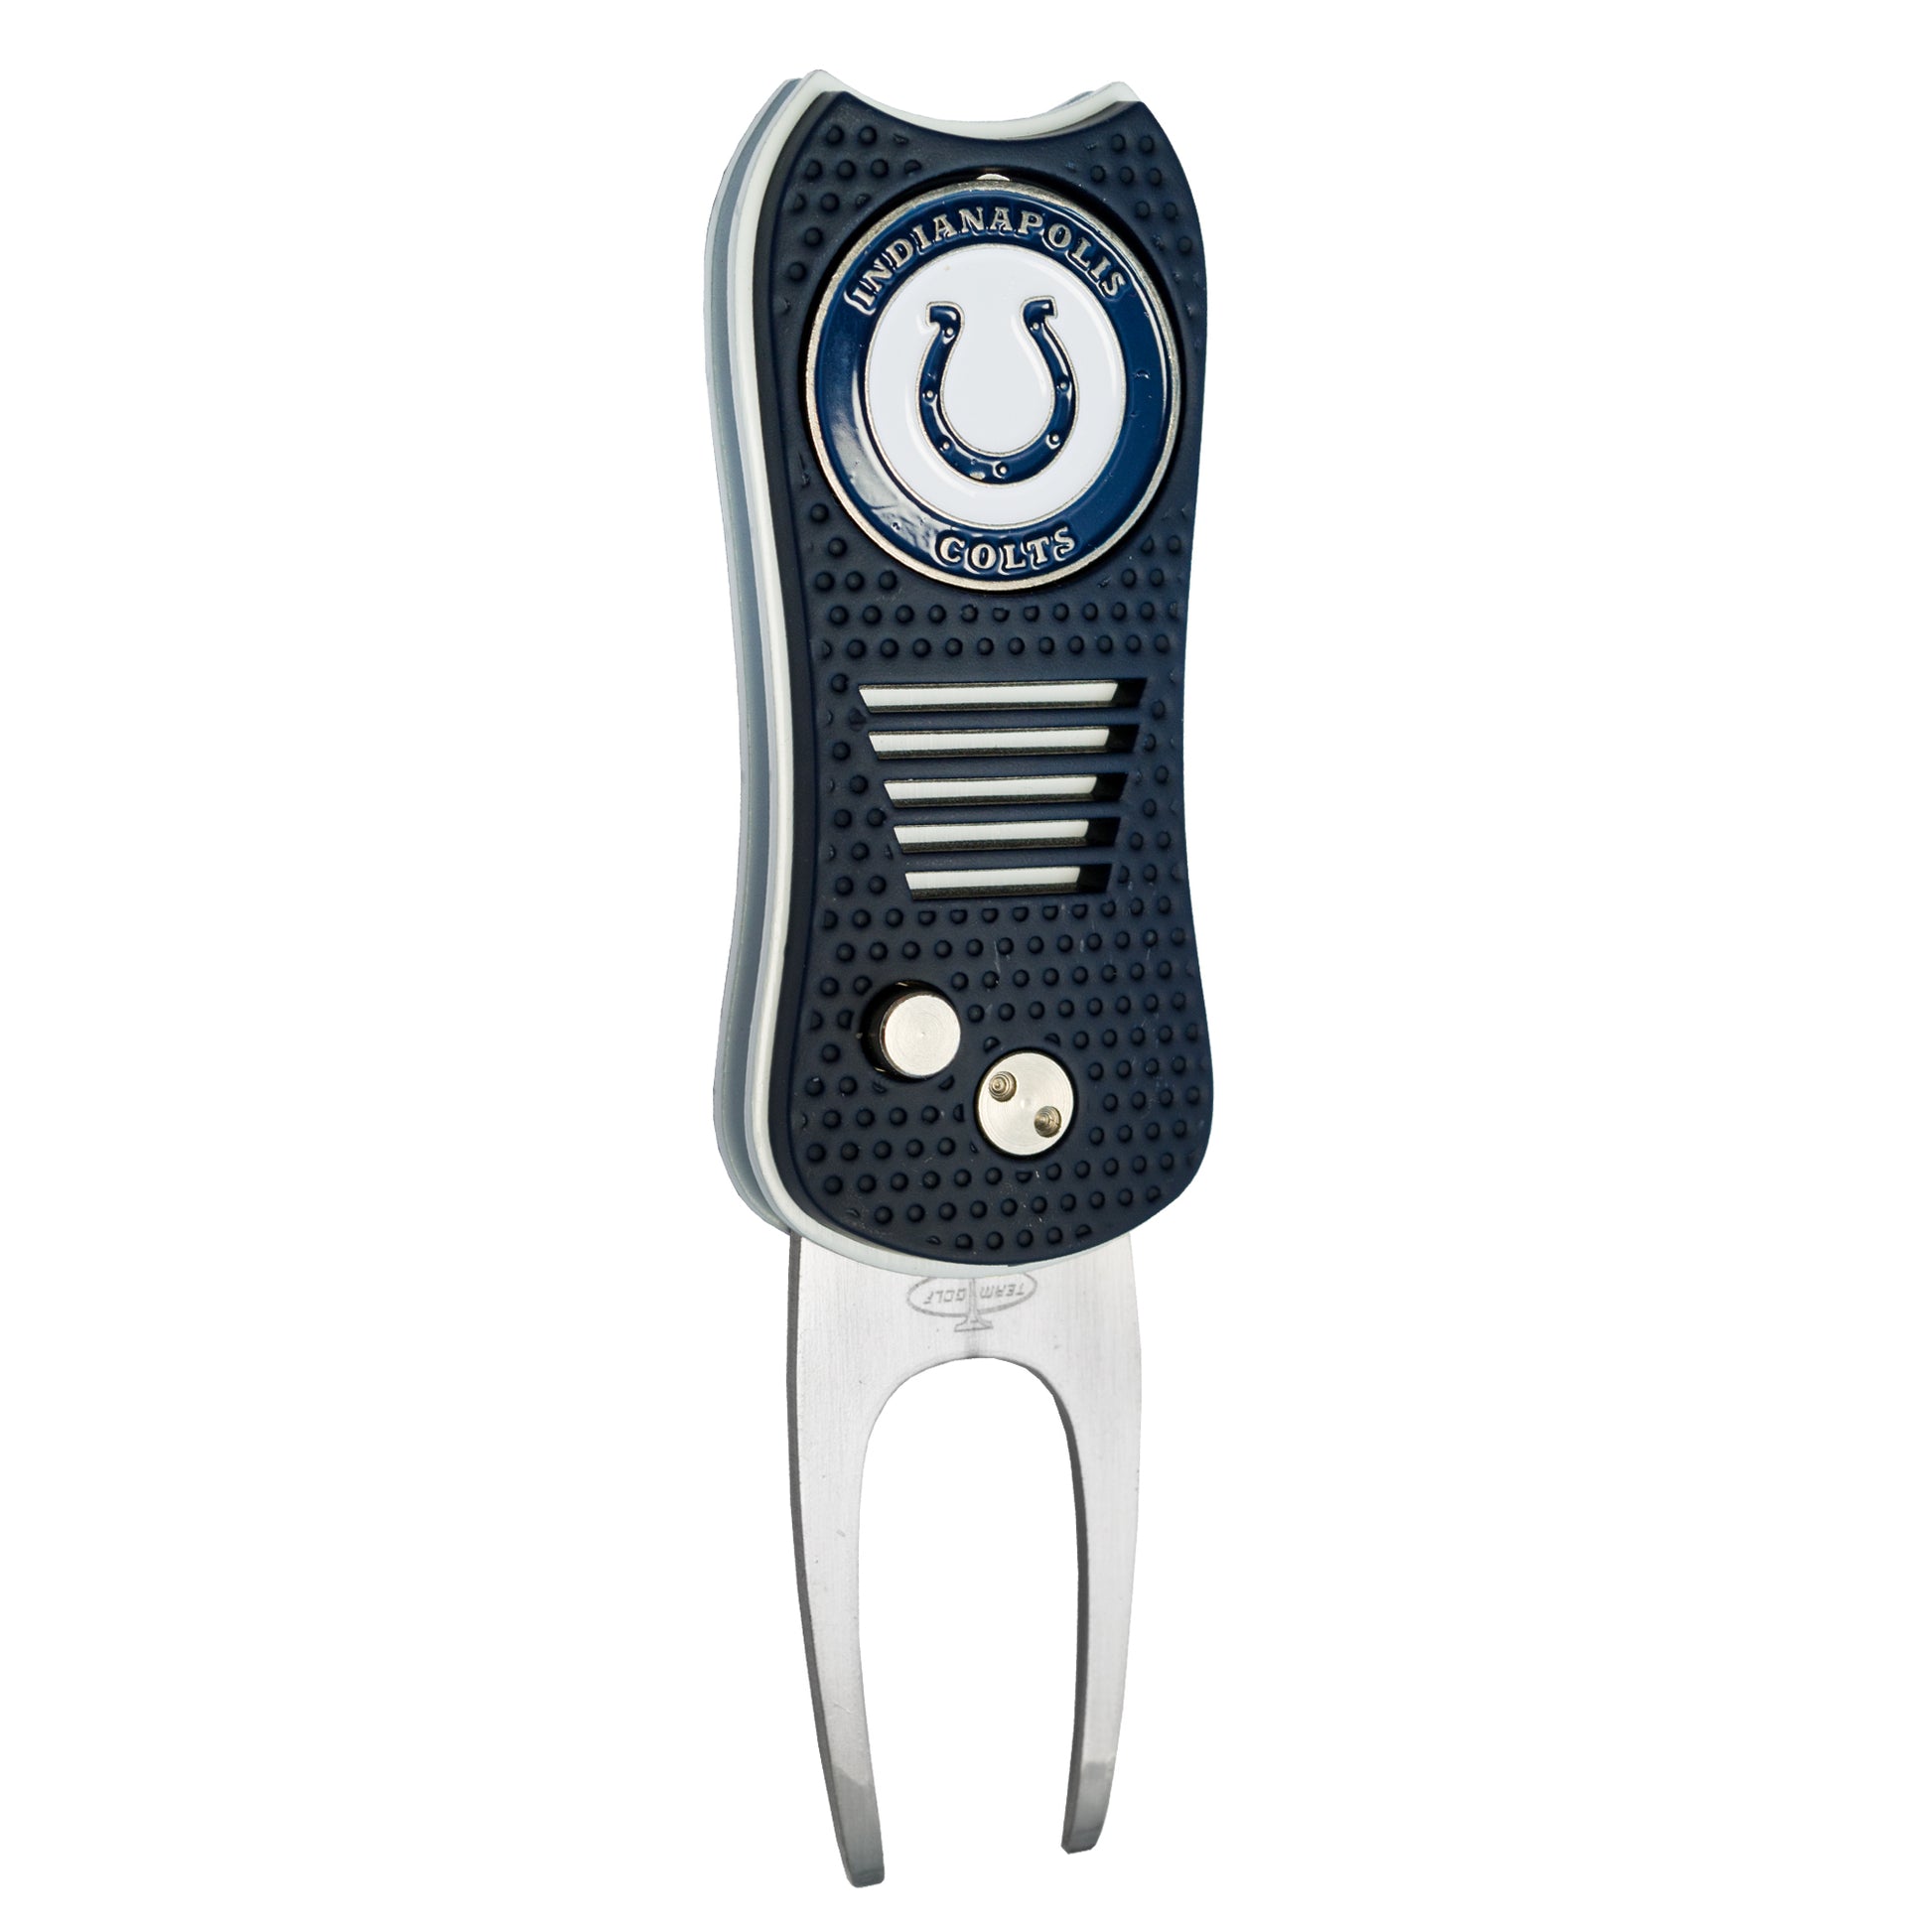 NFL Switchblade Divot Repair Tool (Indianapolis Colts)